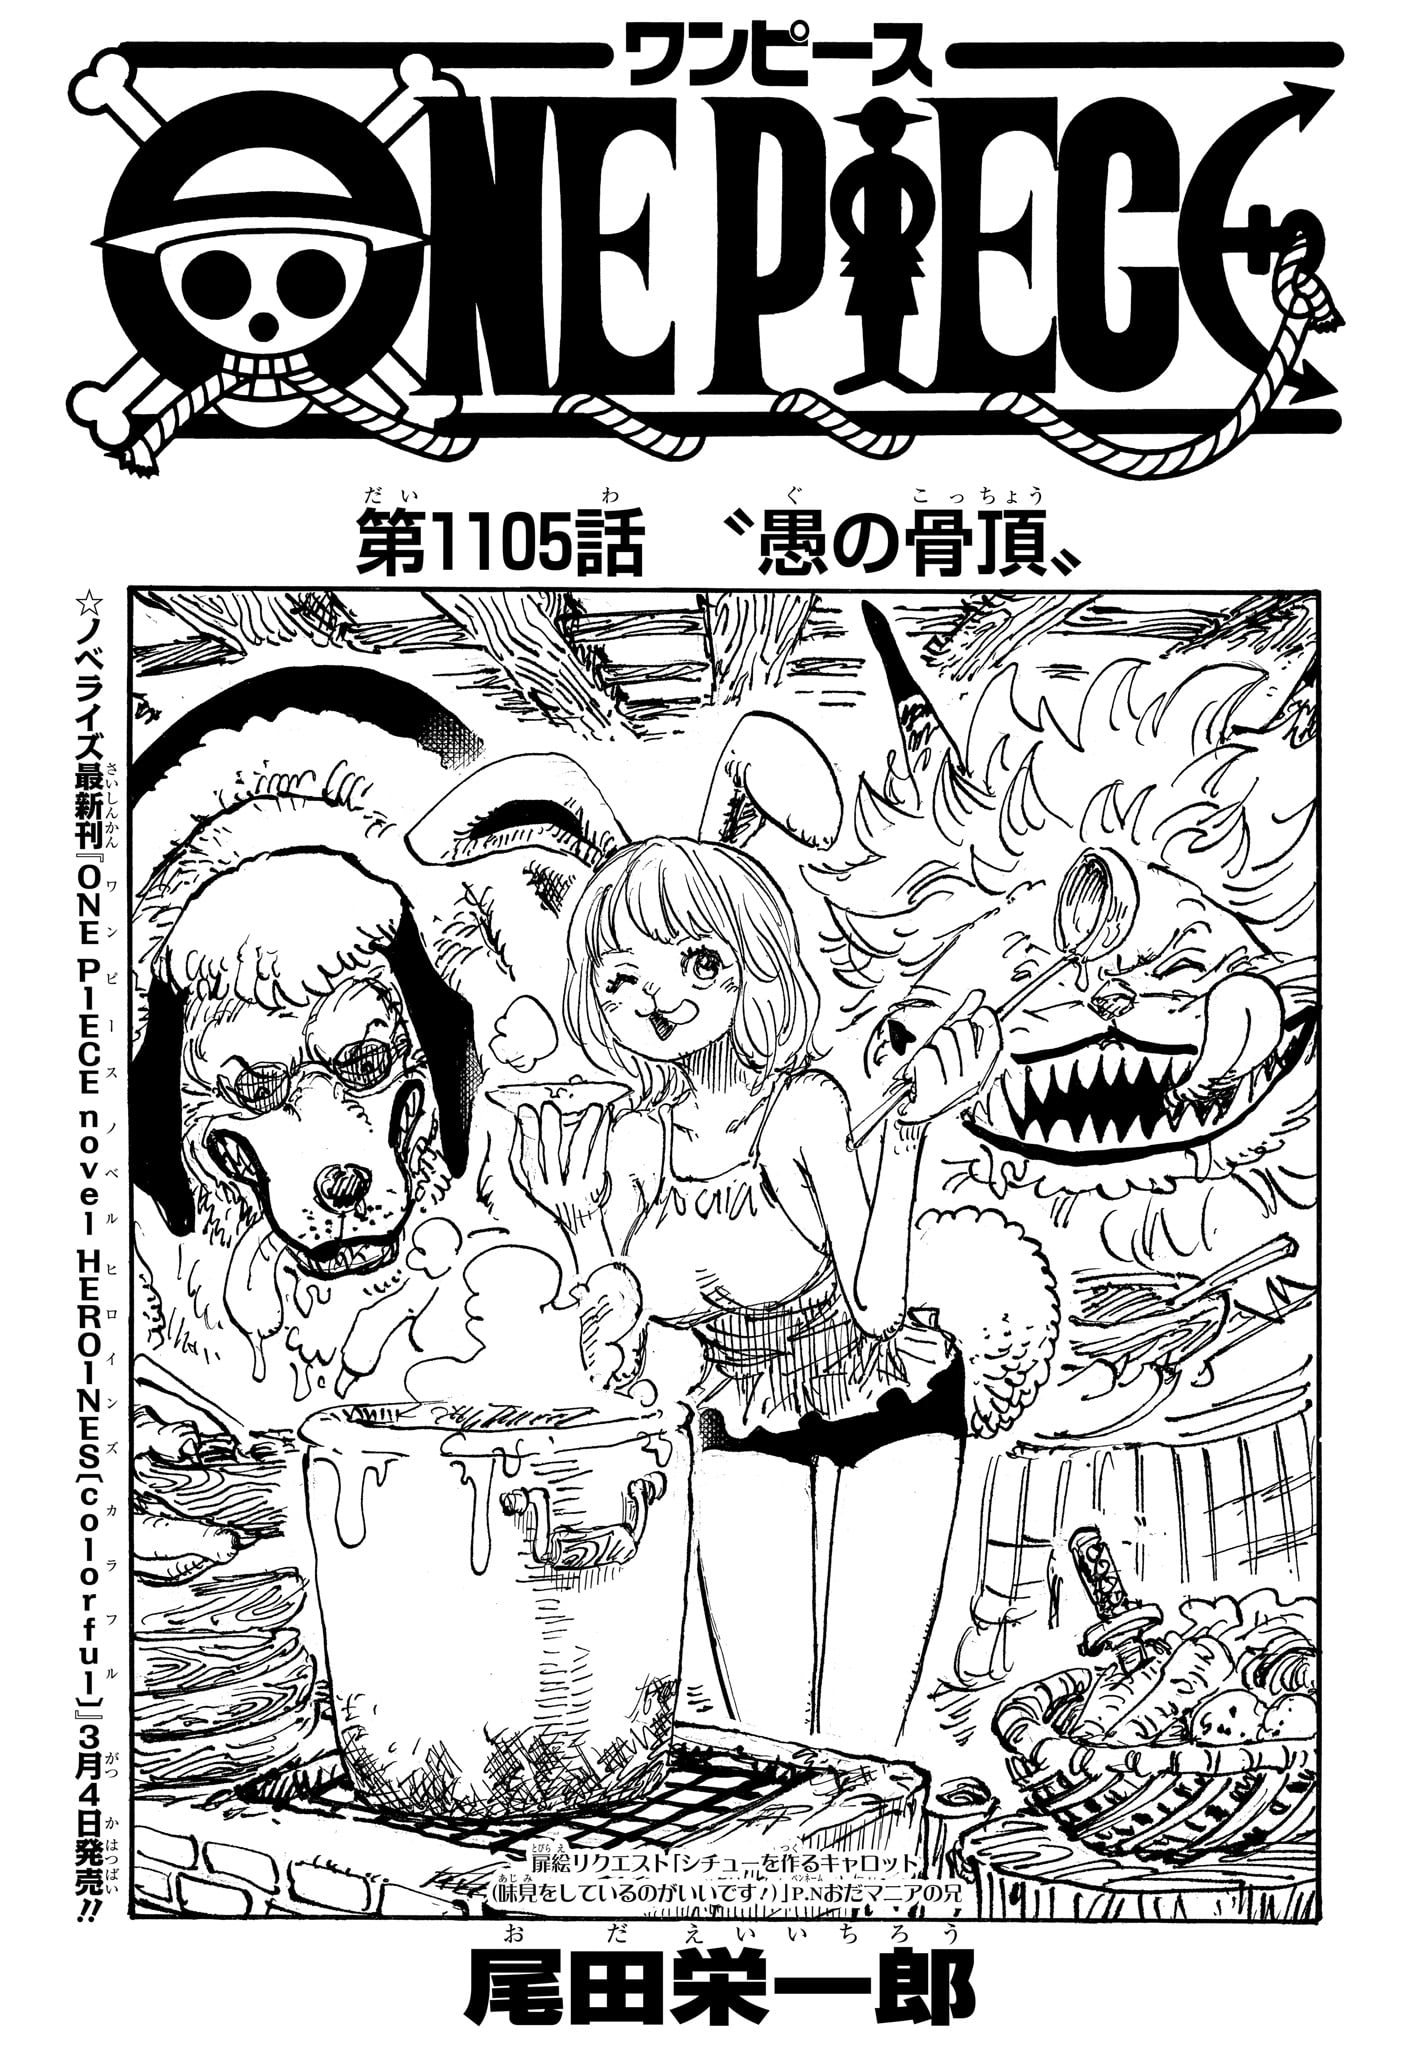 One Piece - Chapter 1105 - Page 1